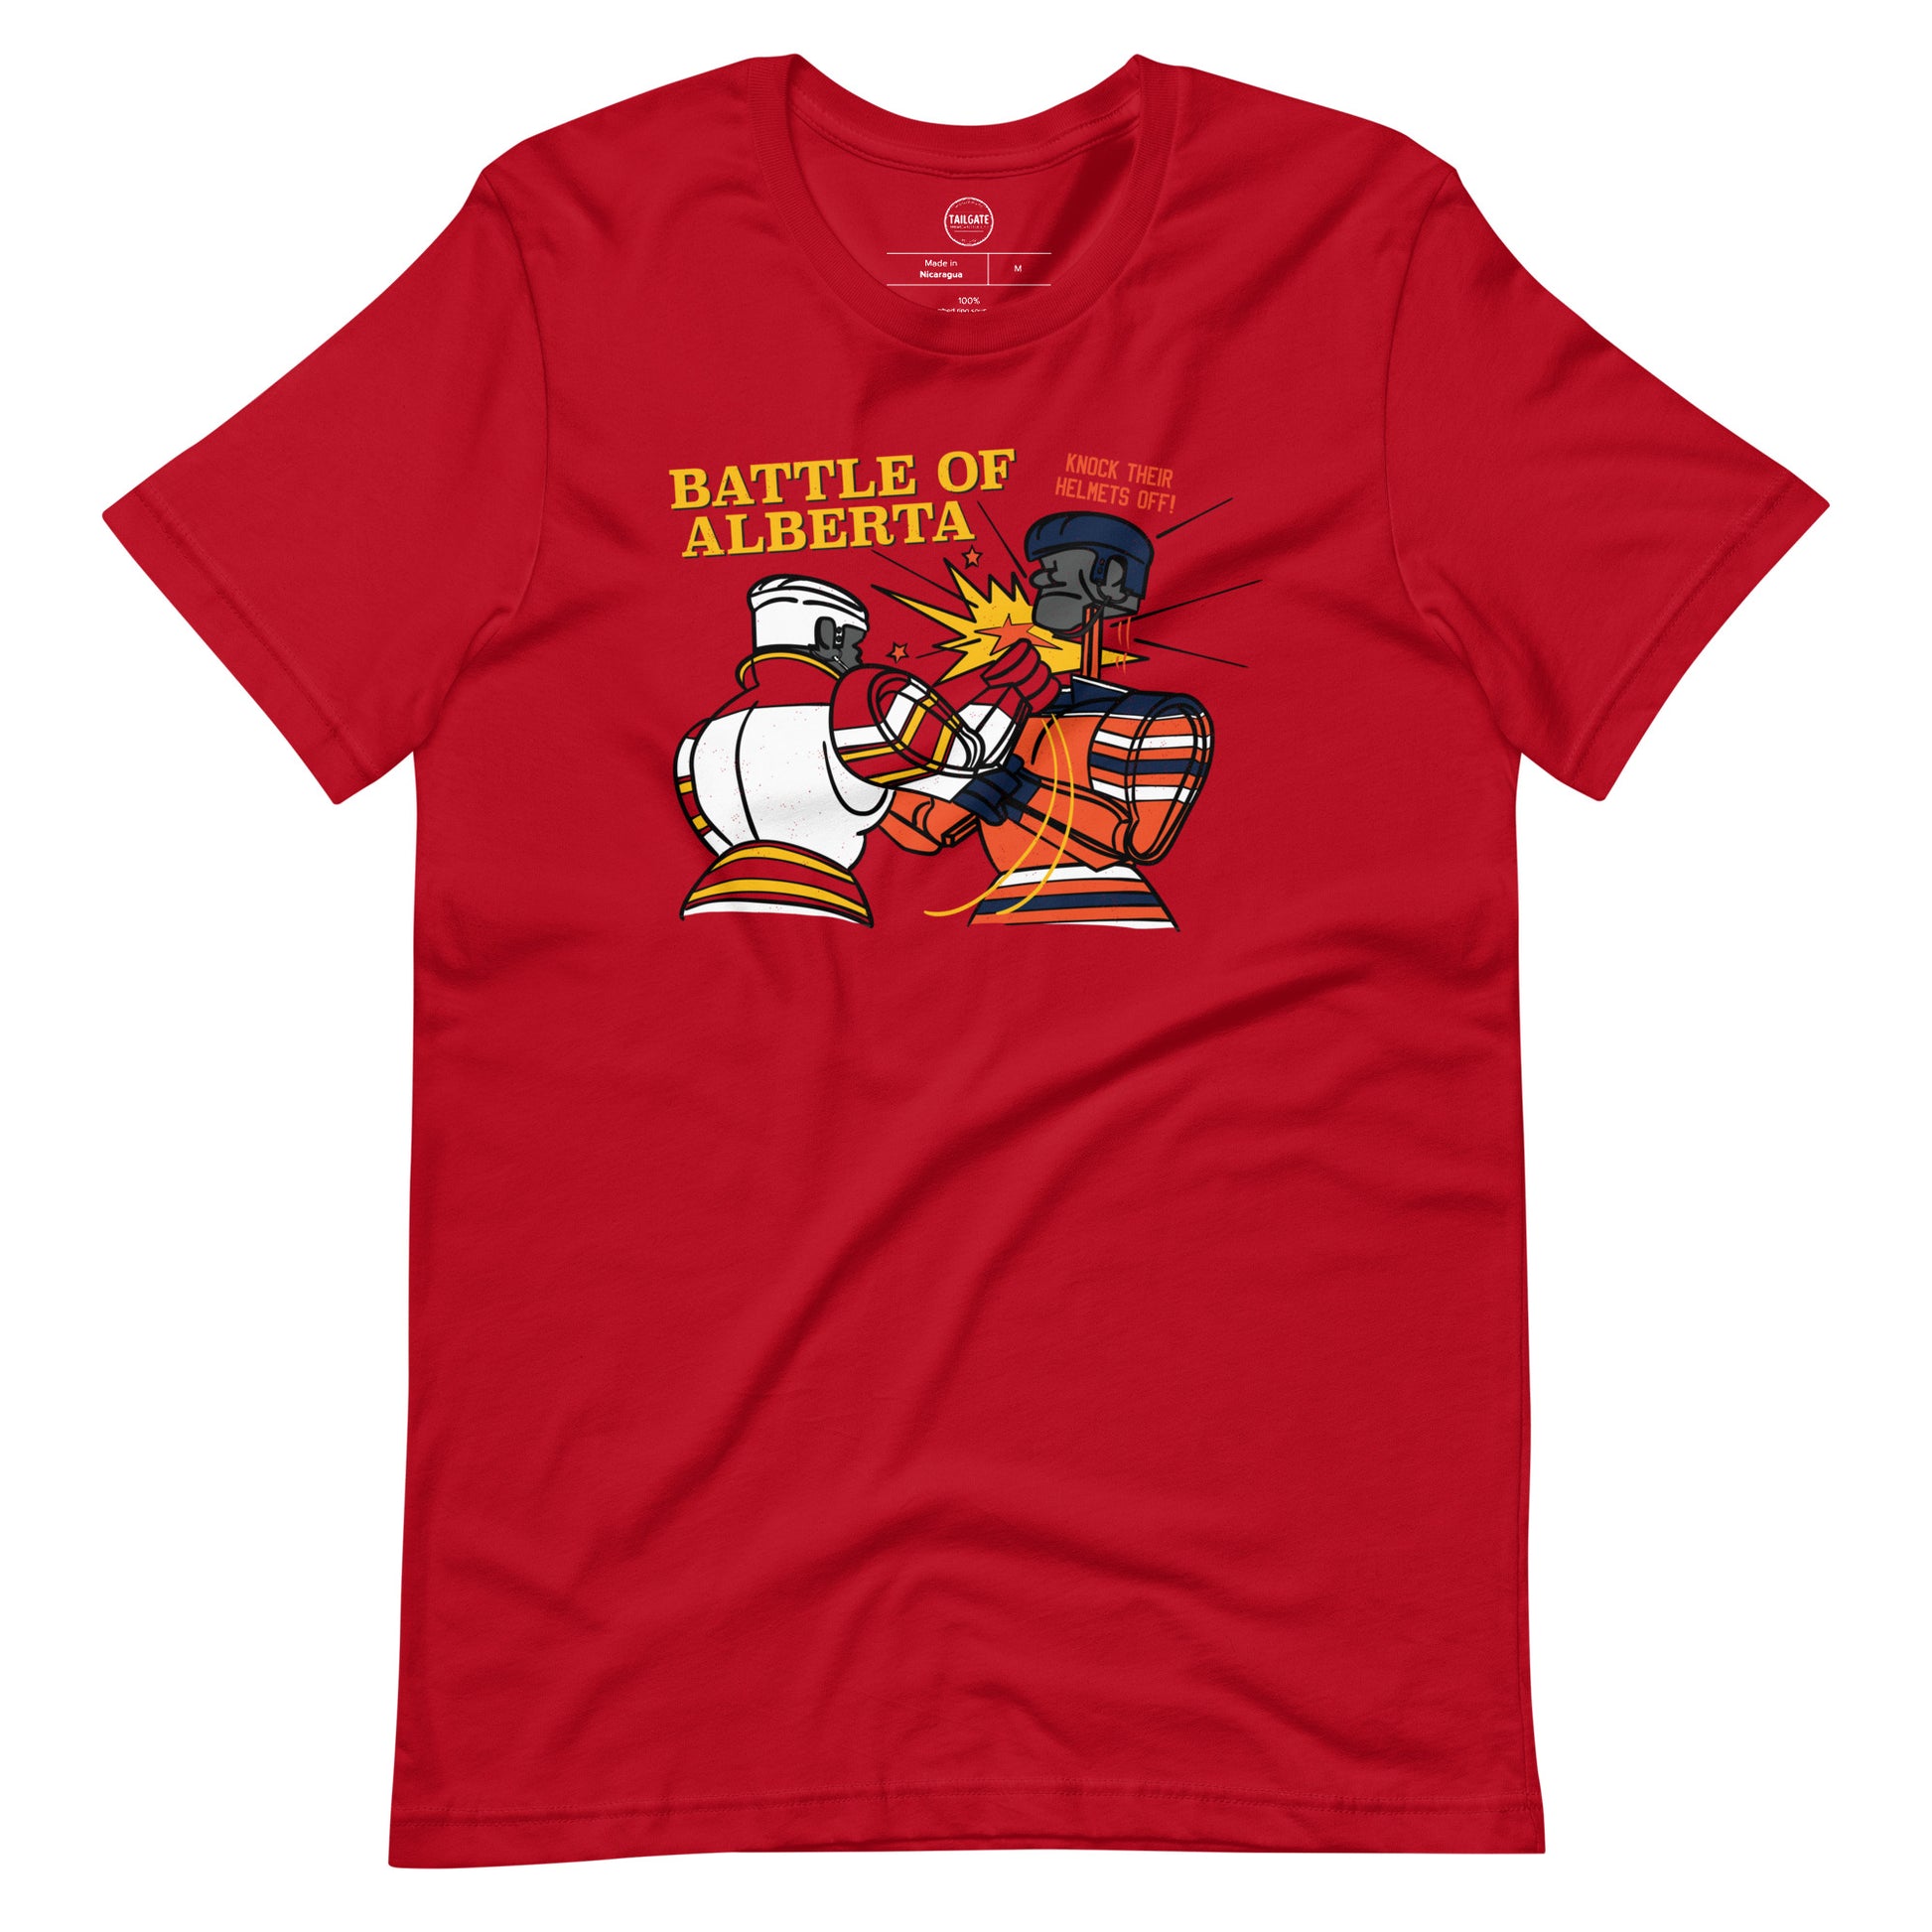 Image of red t-shirt with design of "Battle of Alberta" with rock'em, sock'em style hockey players fighting located on centre chest. Players in the design are completed in NHL Calgary Flames and Edmonton Oilers colours. This design is exclusive to Tailgate Mercantile and available only online.